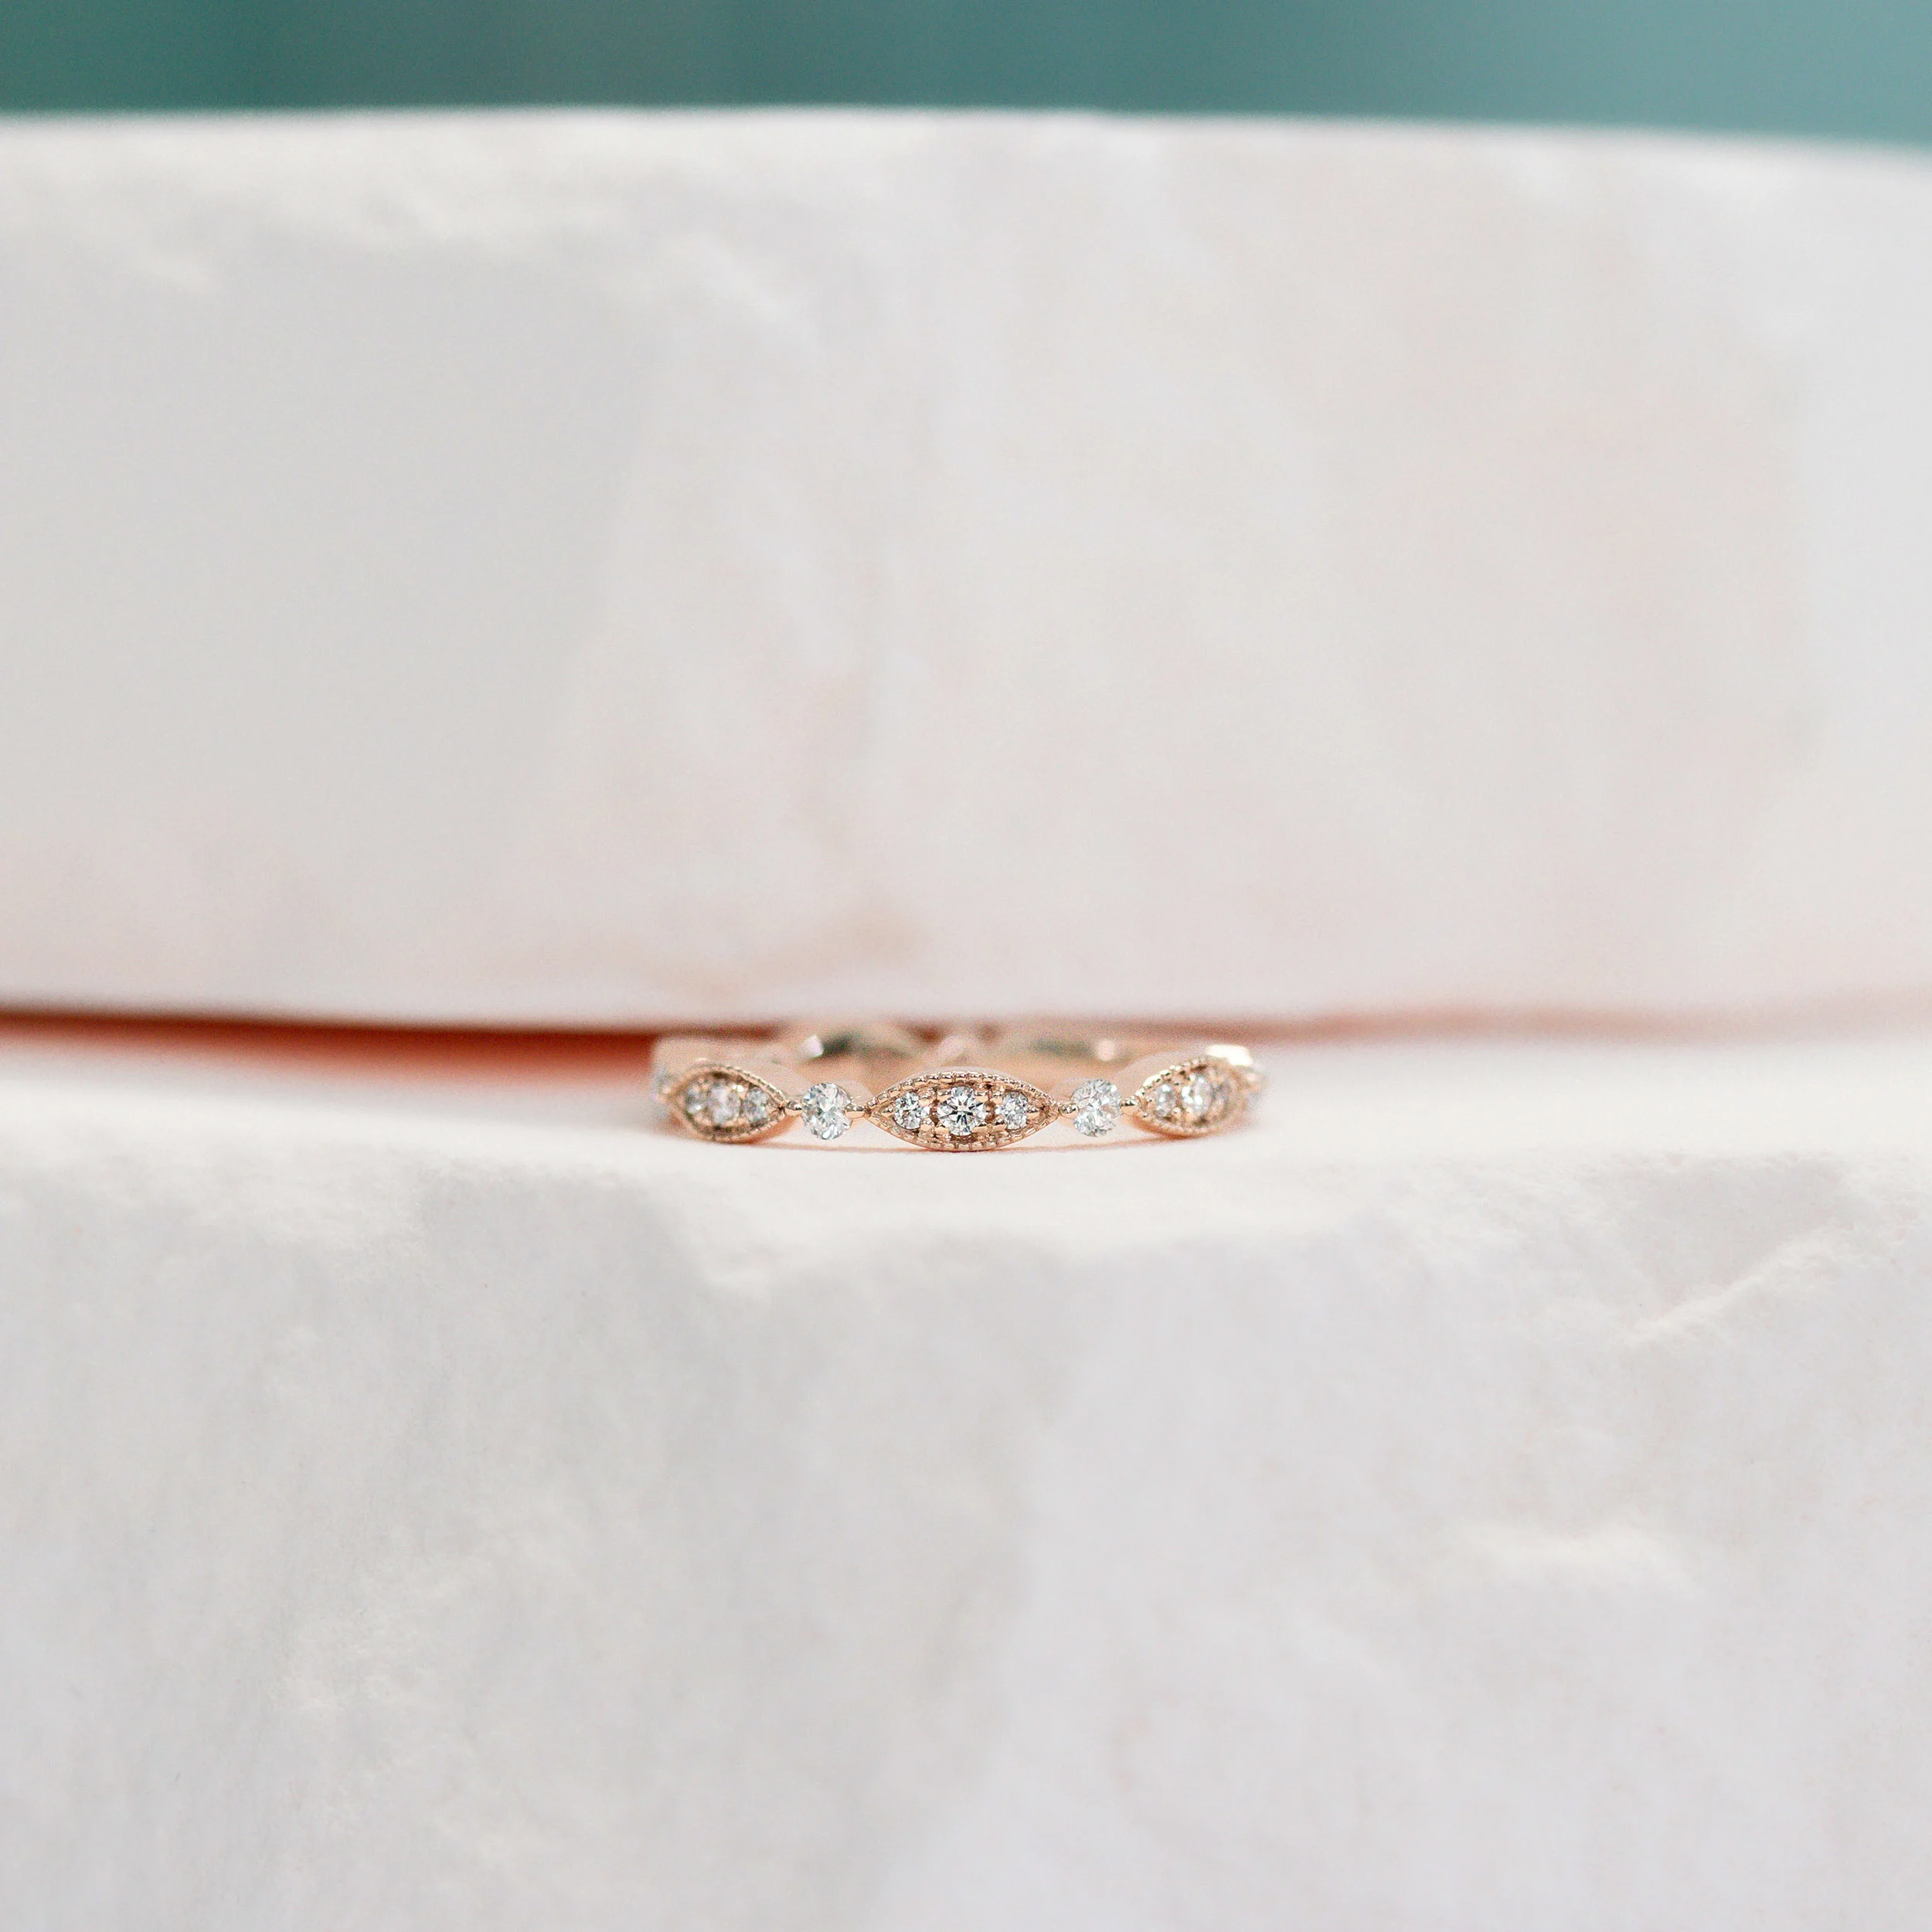 0.25 ct Round Created Diamonds set in 14k Rose Gold Leaf Three Quarter Band in 14k Rose Gold 0.25ctw (Main View)